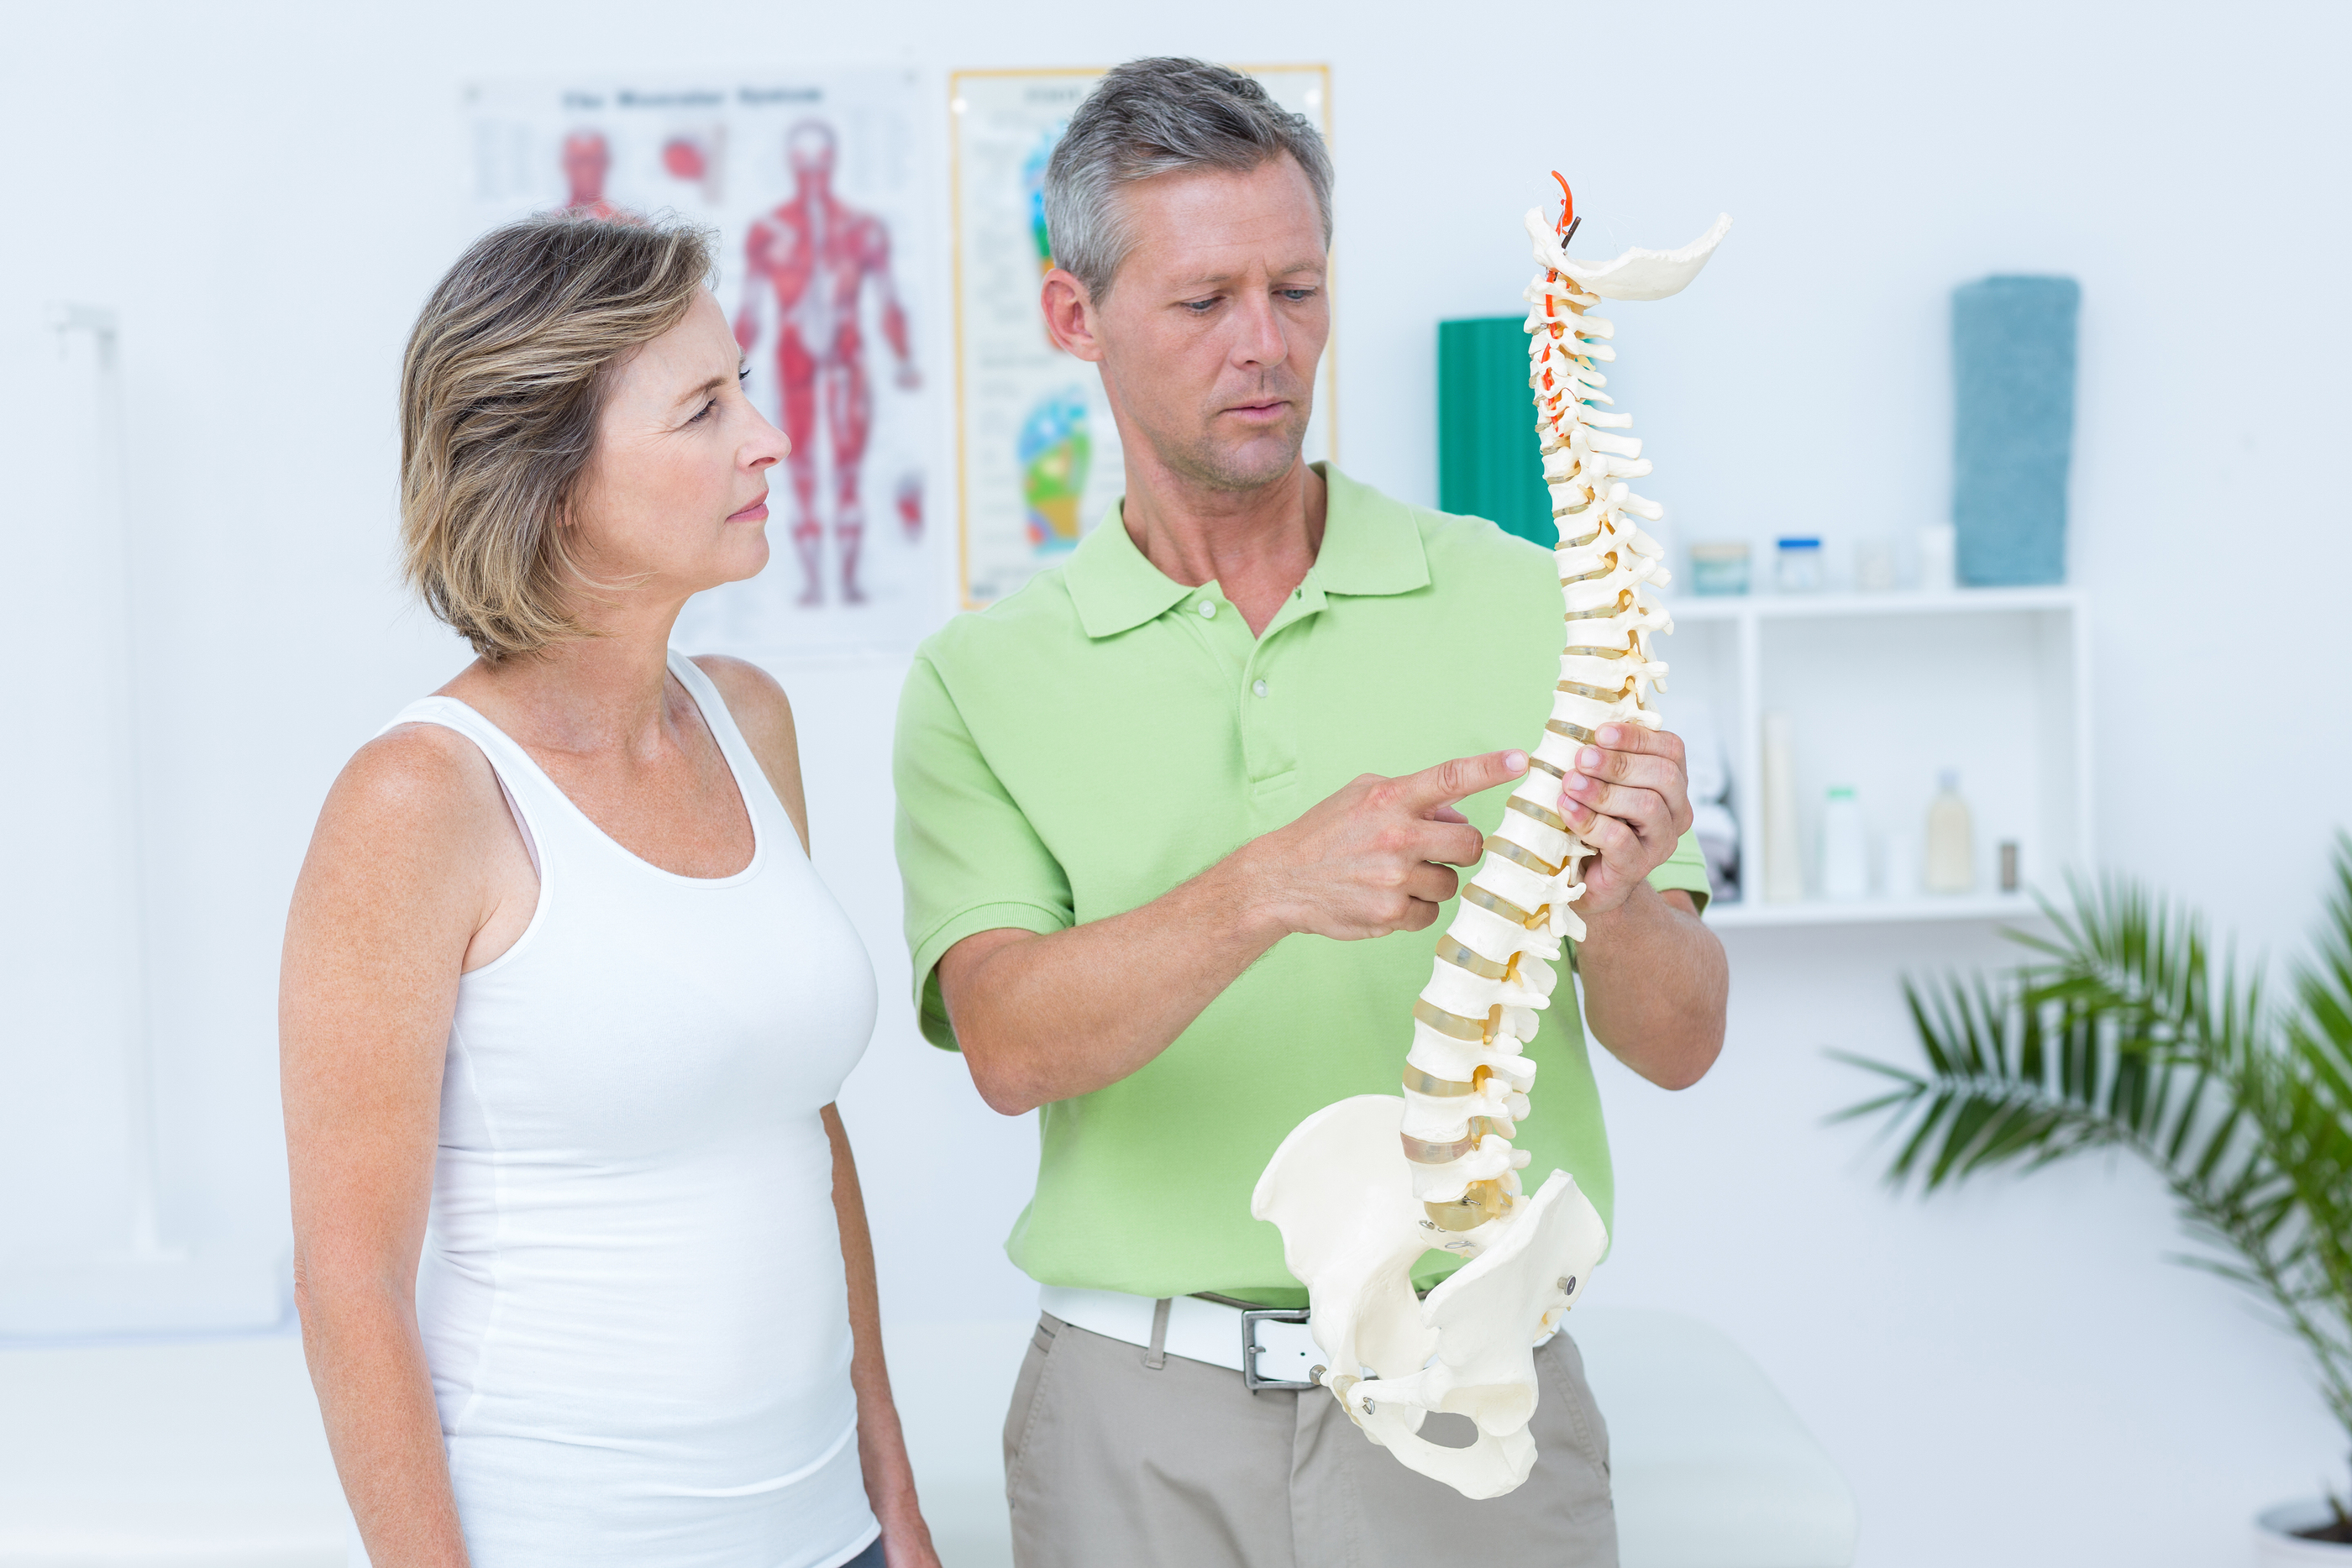 Doctor showing anatomical spine in medical office